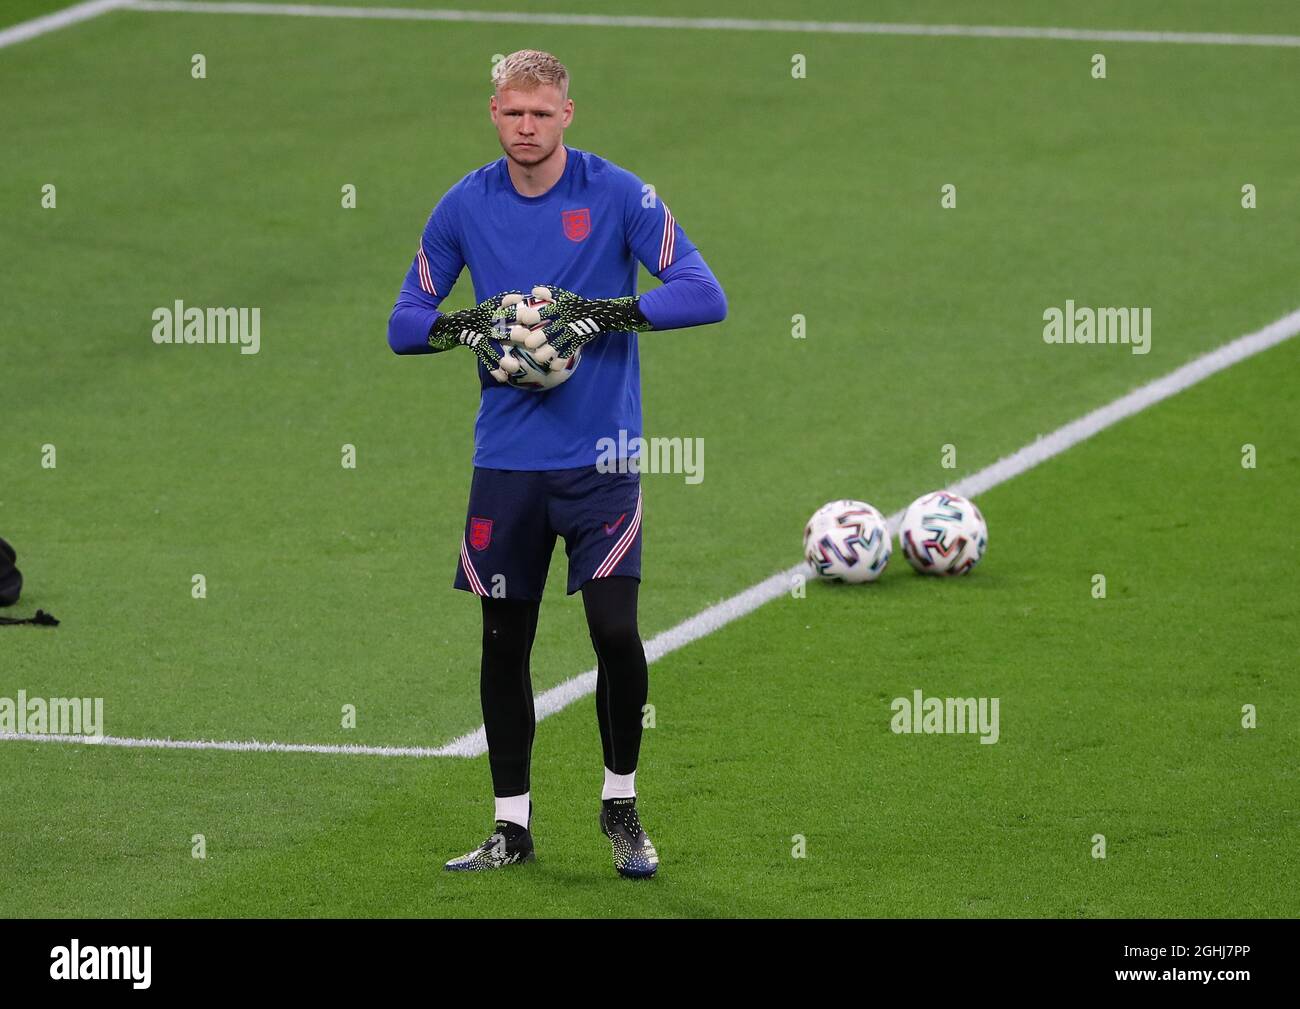 London, England, 18th June 2021. Aaron Ramsdale of England warms up before the UEFA European Championships match at Wembley Stadium, London. Picture credit should read: David Klein / Sportimage via PA Images Stock Photo